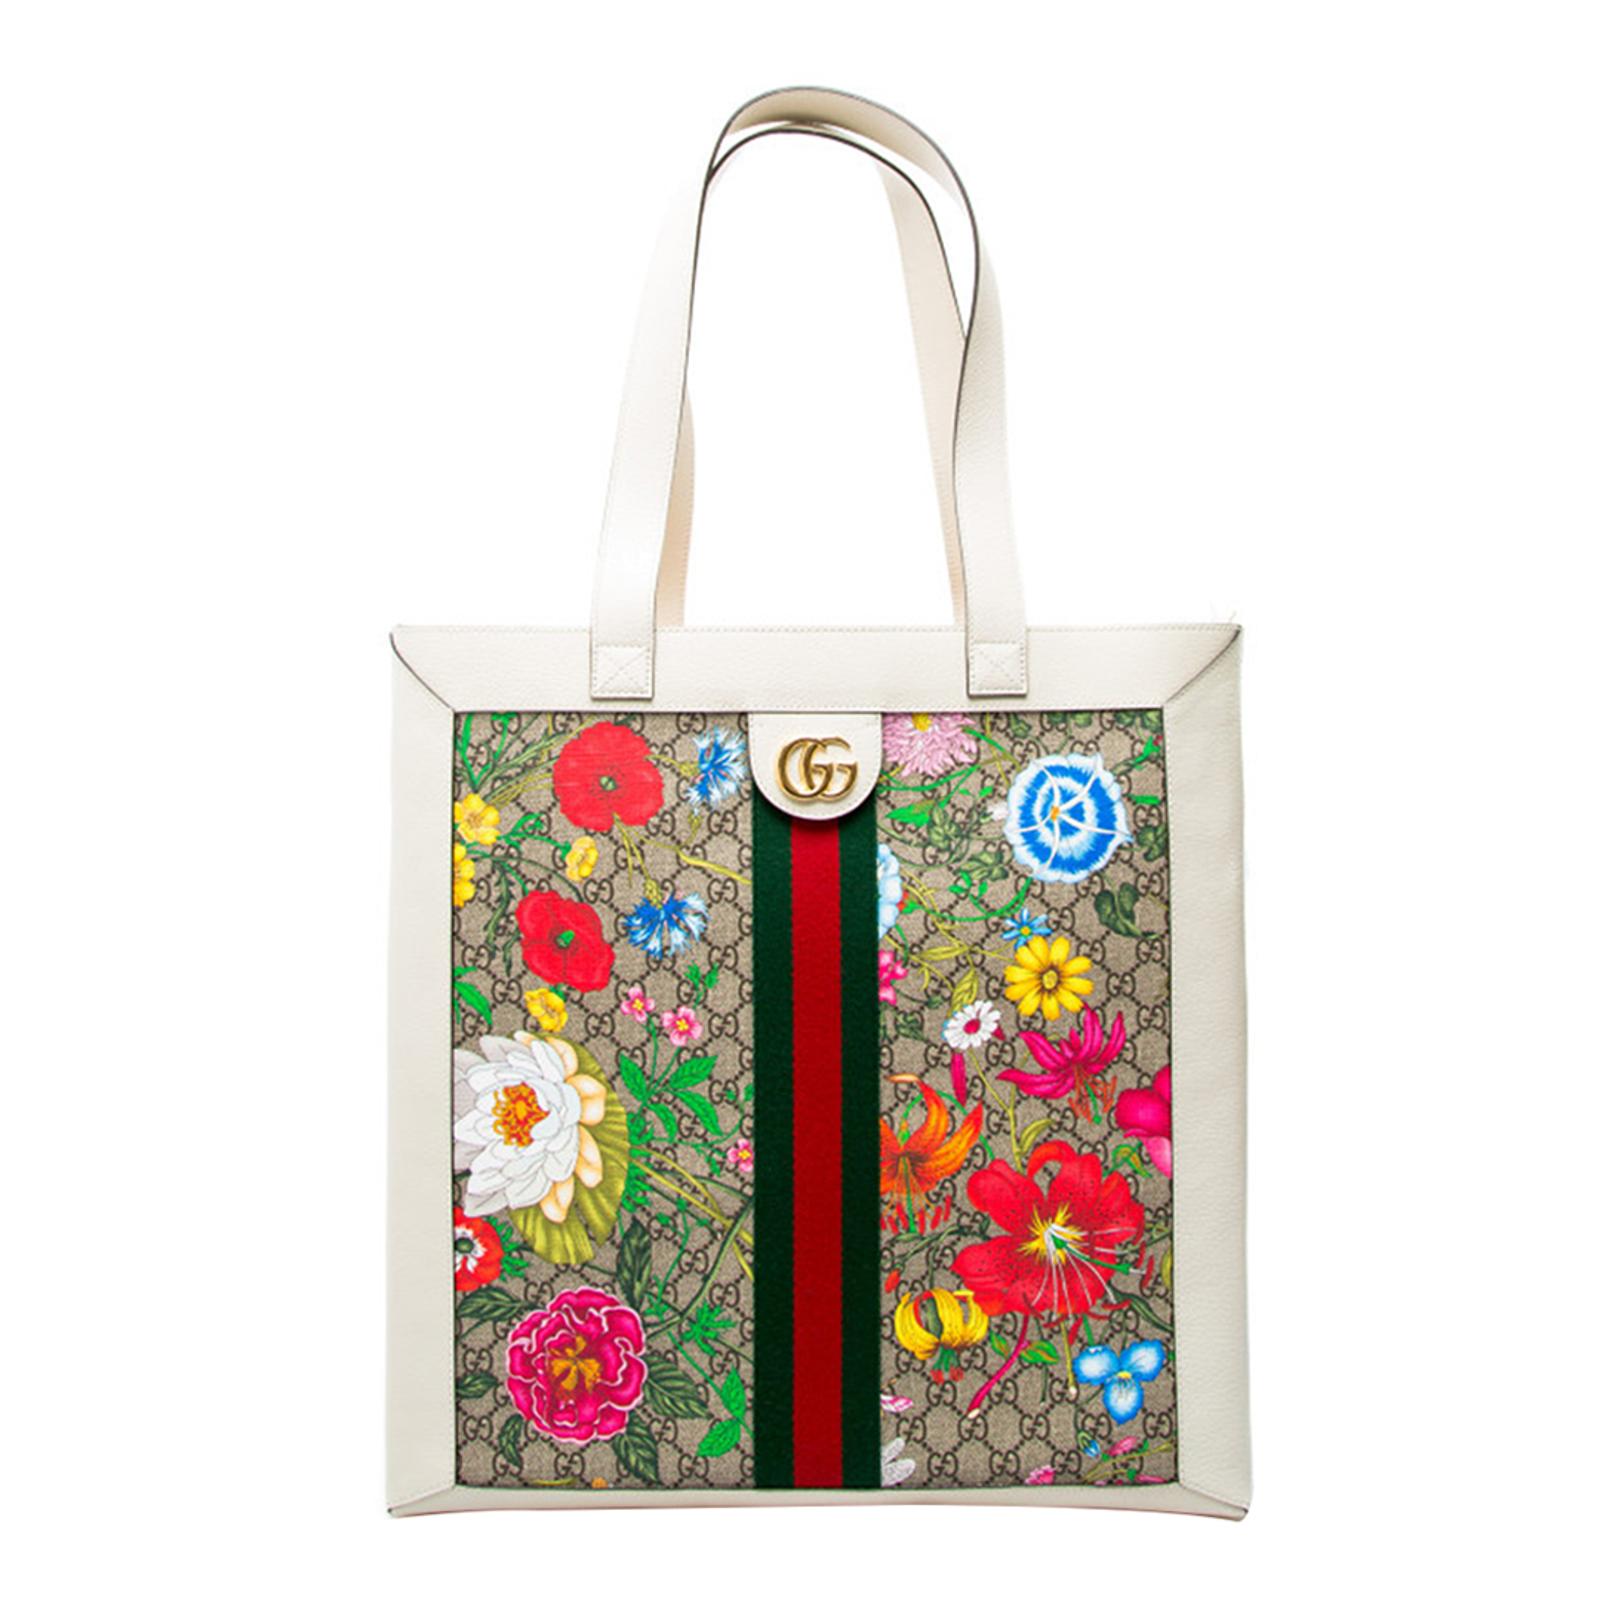 Gucci Mystic White Ophidia Large Tote Bag - BrandAlley